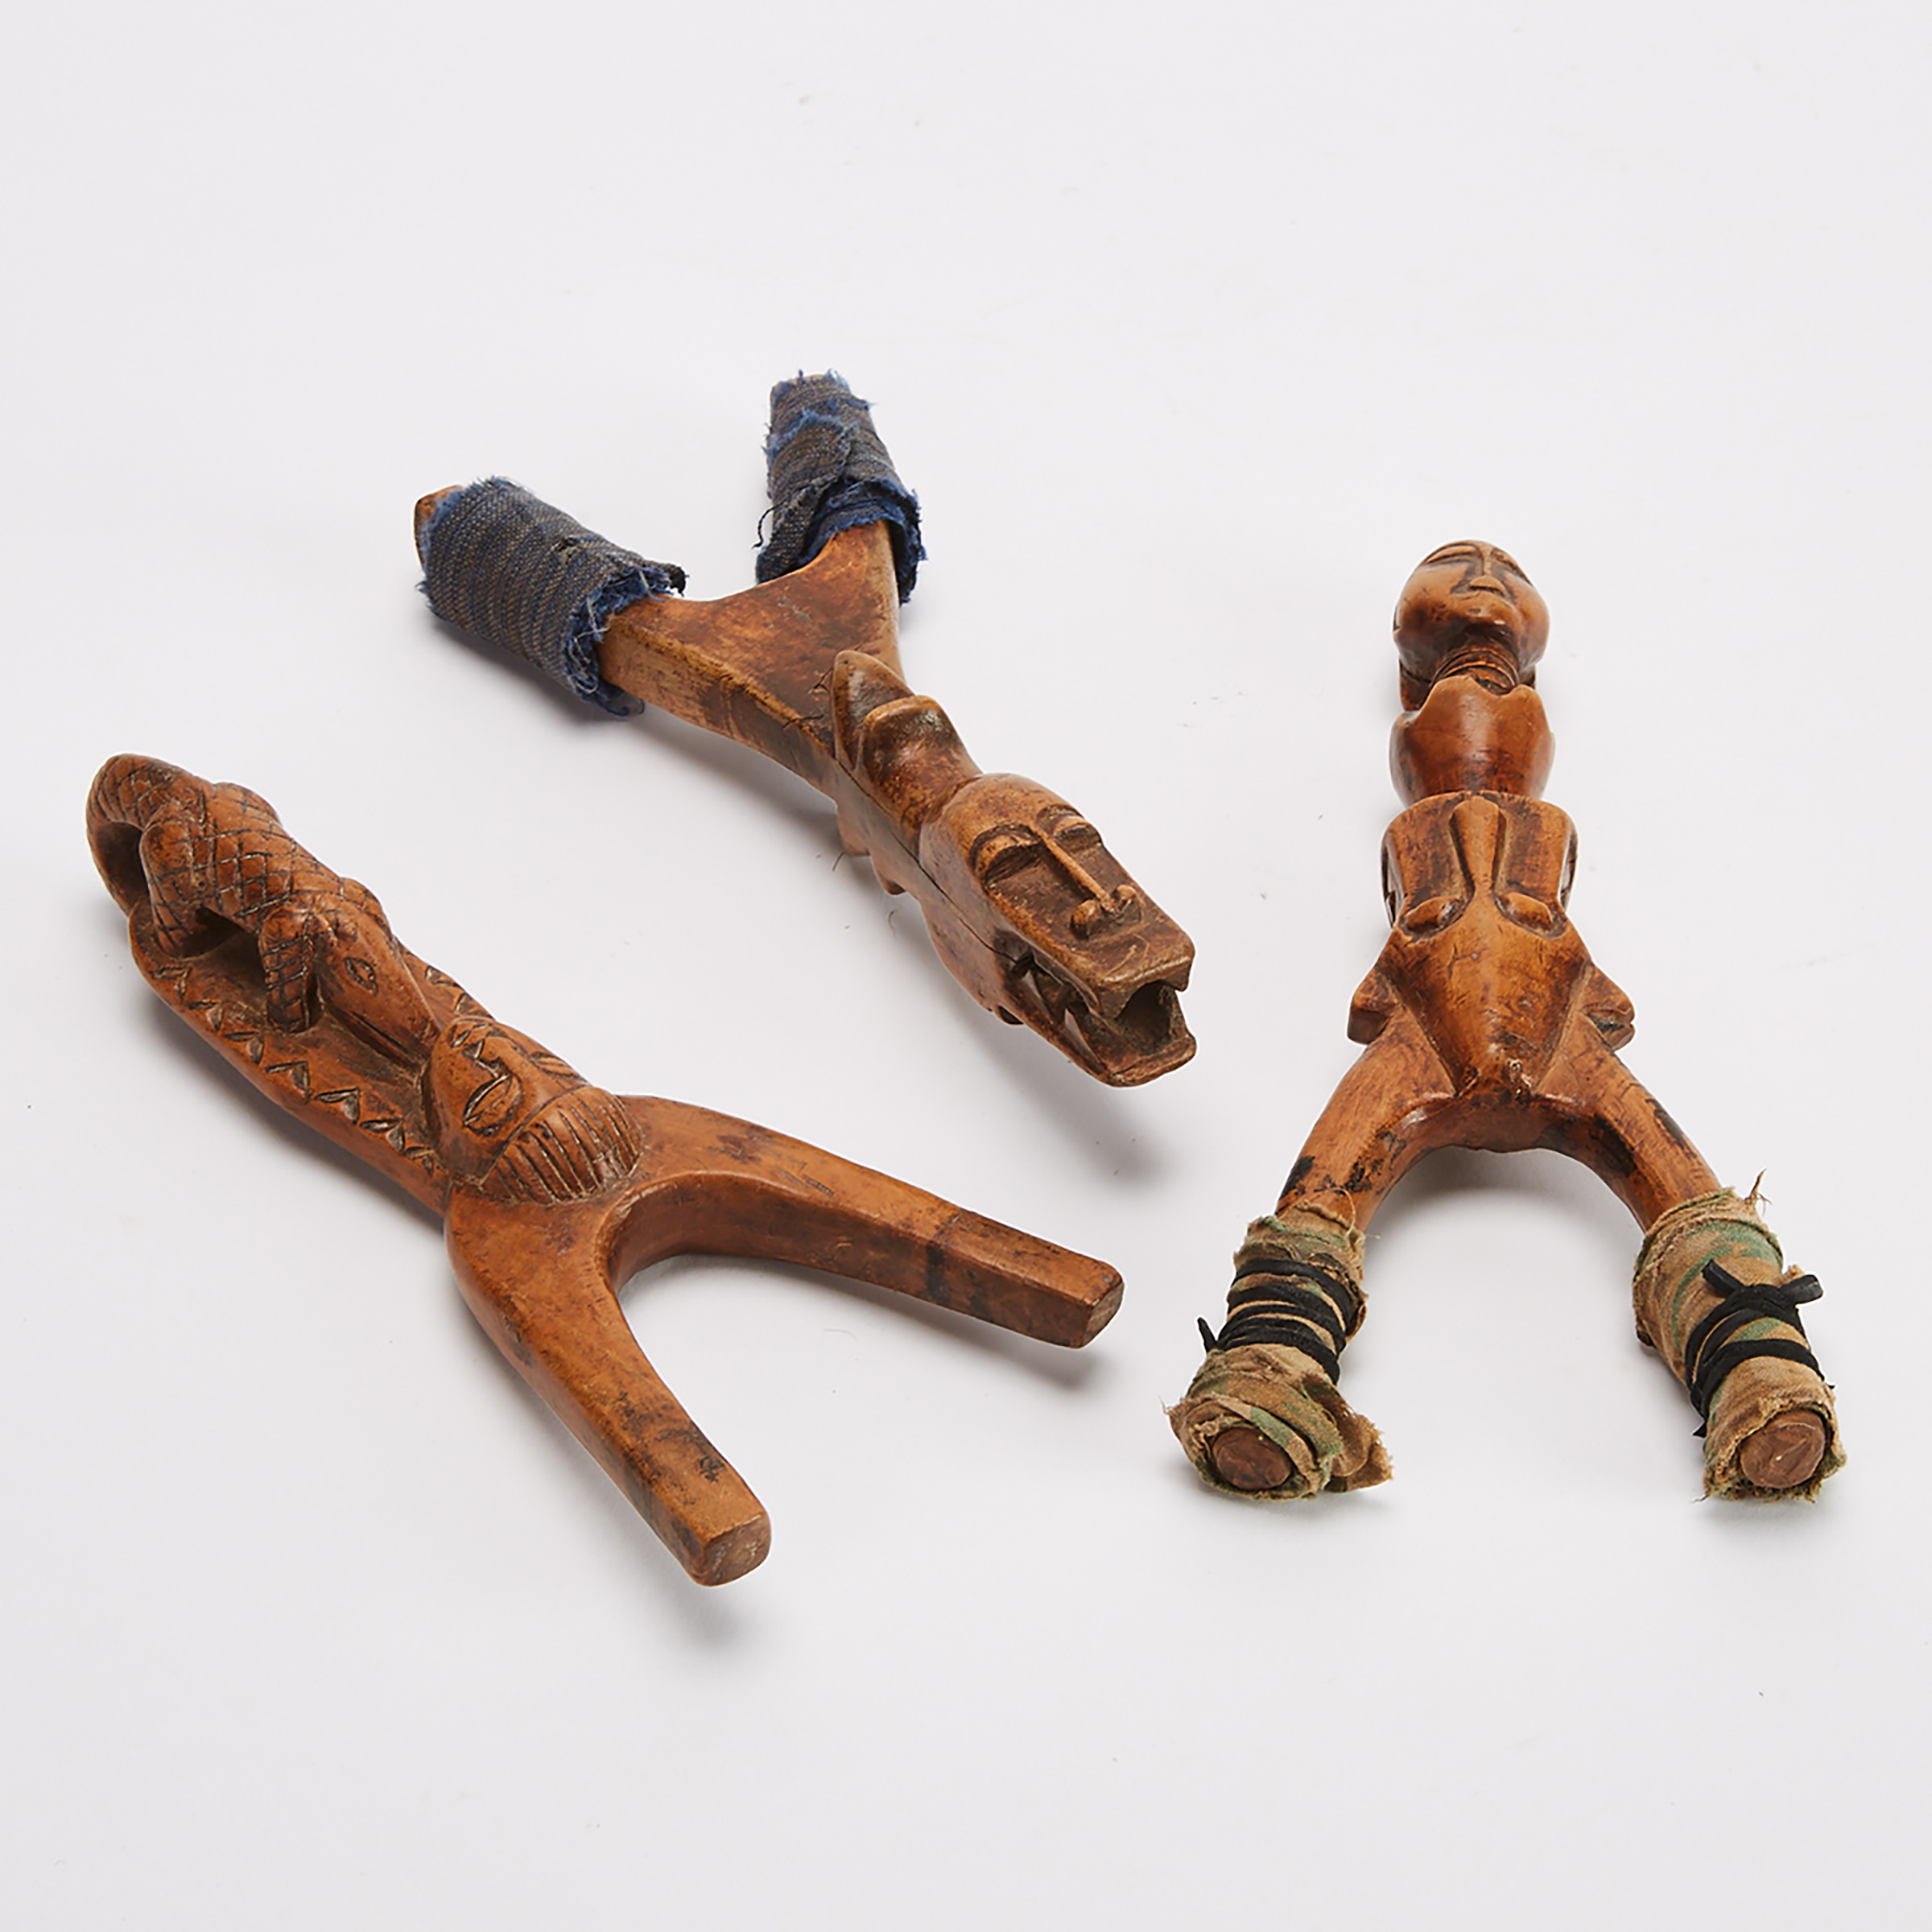 Two Baule Slingshots, Ivory Coast, West Africa together with a unidentified African slingshot